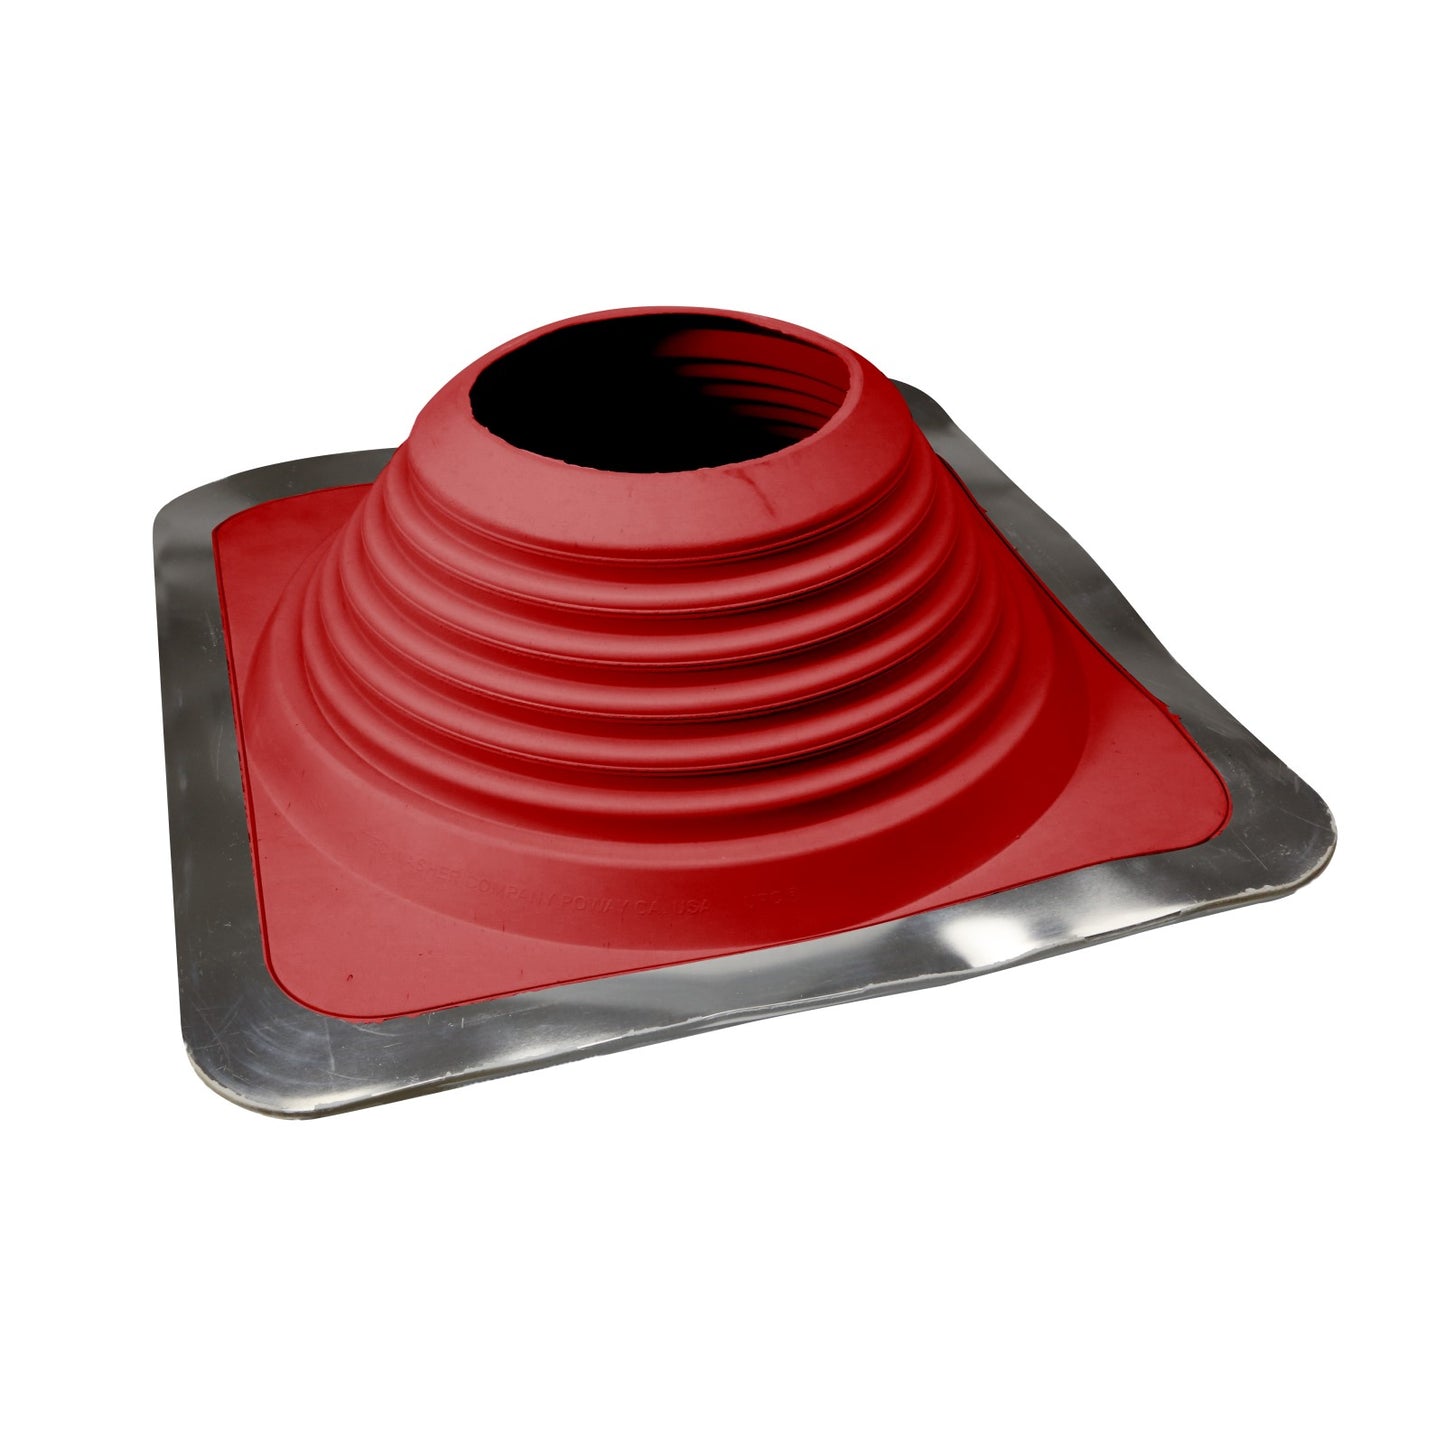 #8 Roofjack Square EPDM Pipe Flashing Boot, Bright Red